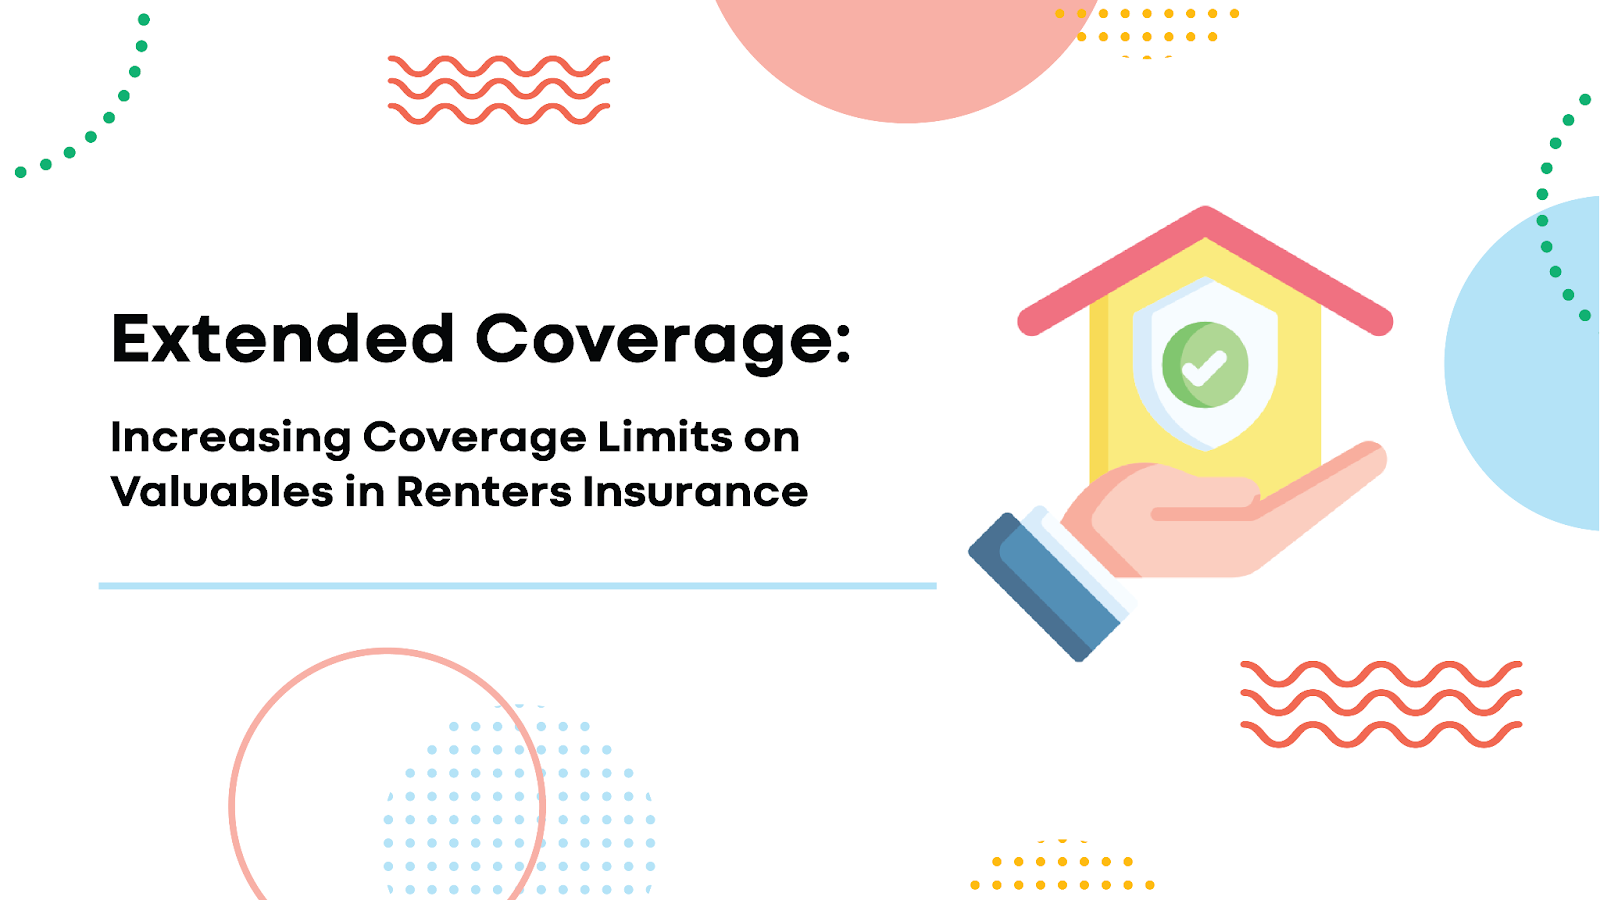 Extended Coverage: Increasing Coverage Limits on Valuables in Renters Insurance